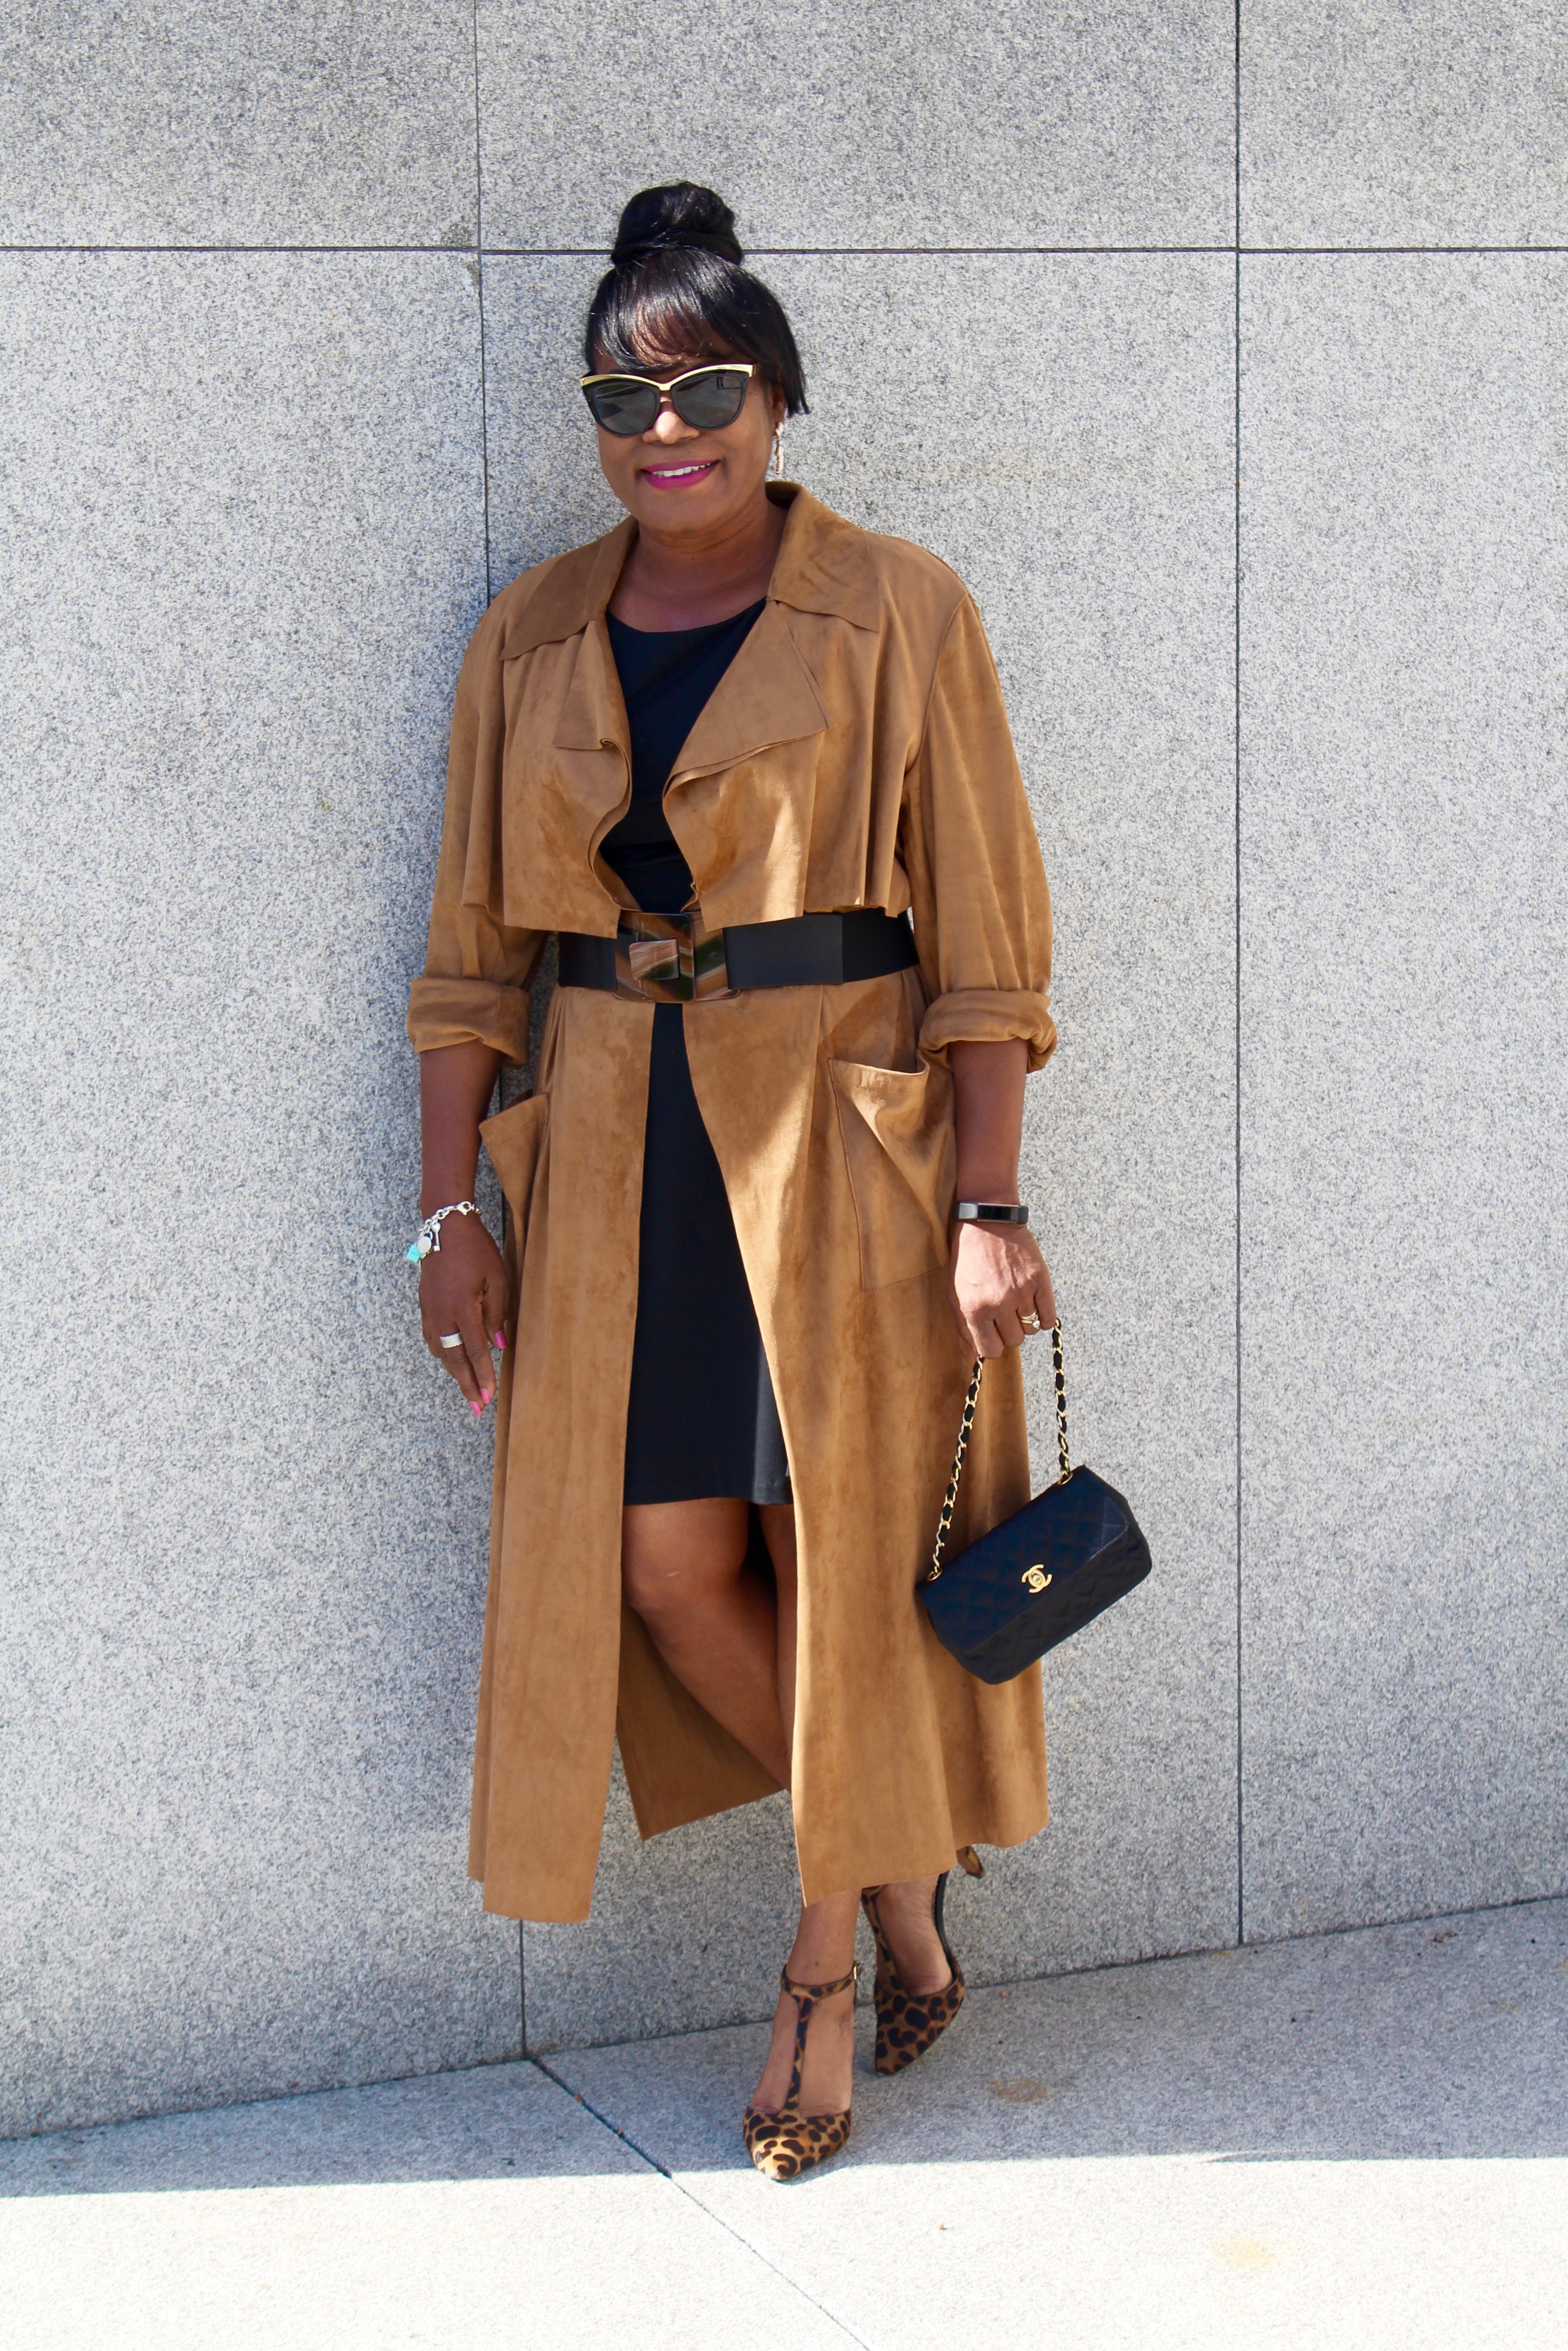 ASOS Suede Trench Belted Over Dress; Amazon Review